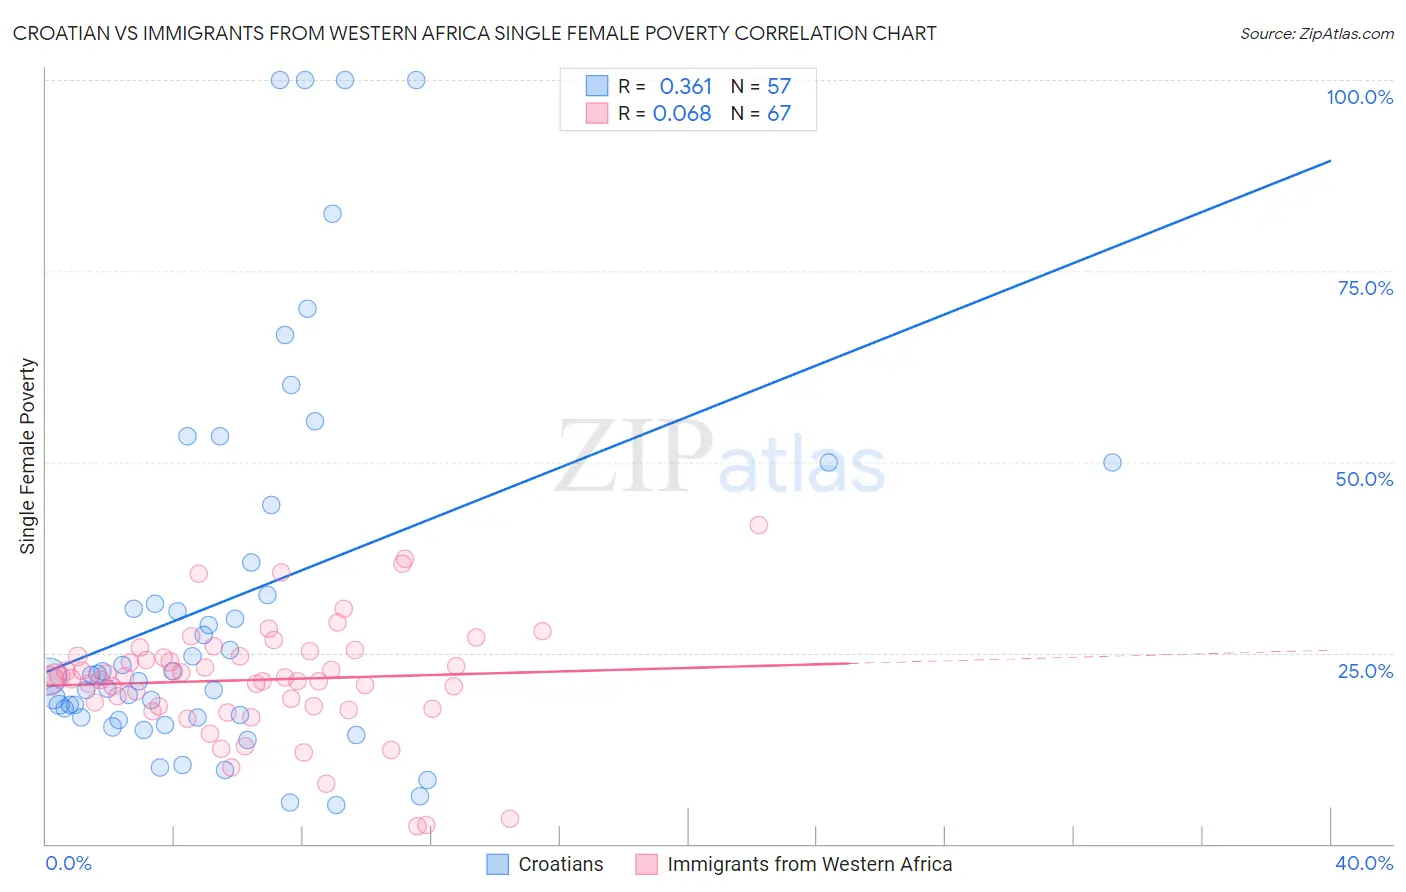 Croatian vs Immigrants from Western Africa Single Female Poverty